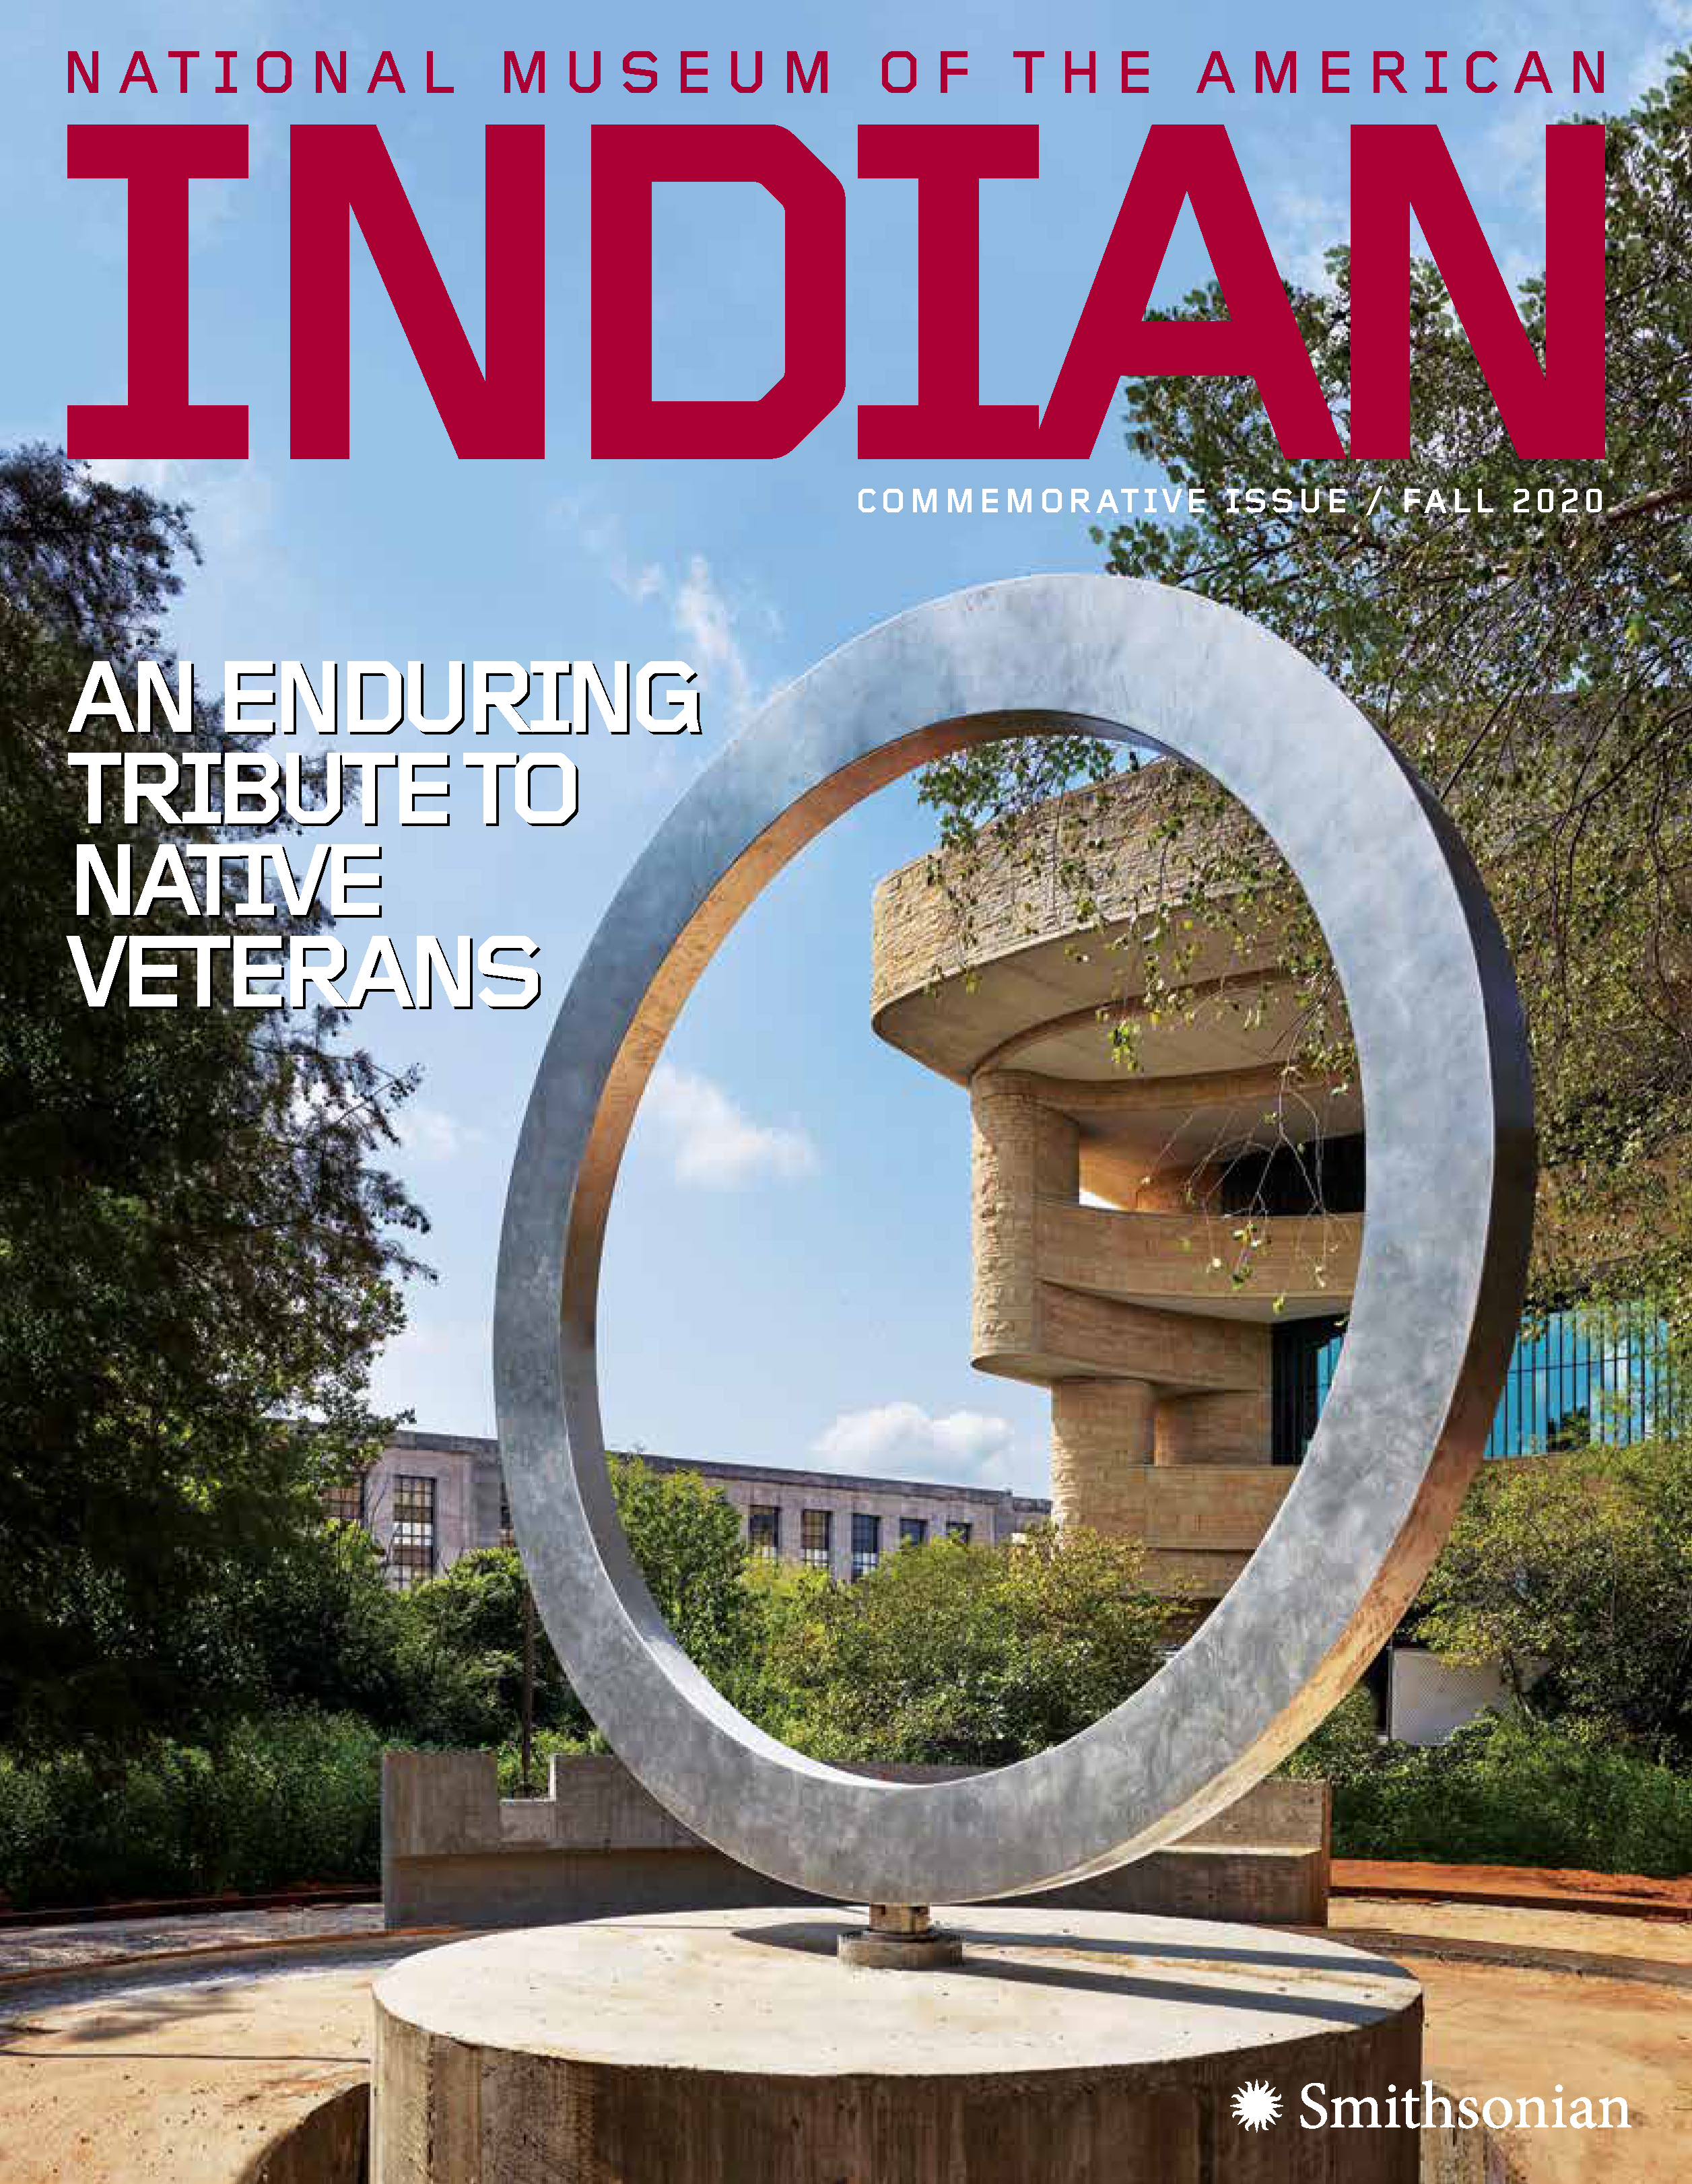 Cover of NMAI Fall 2020 Commemorative Issue